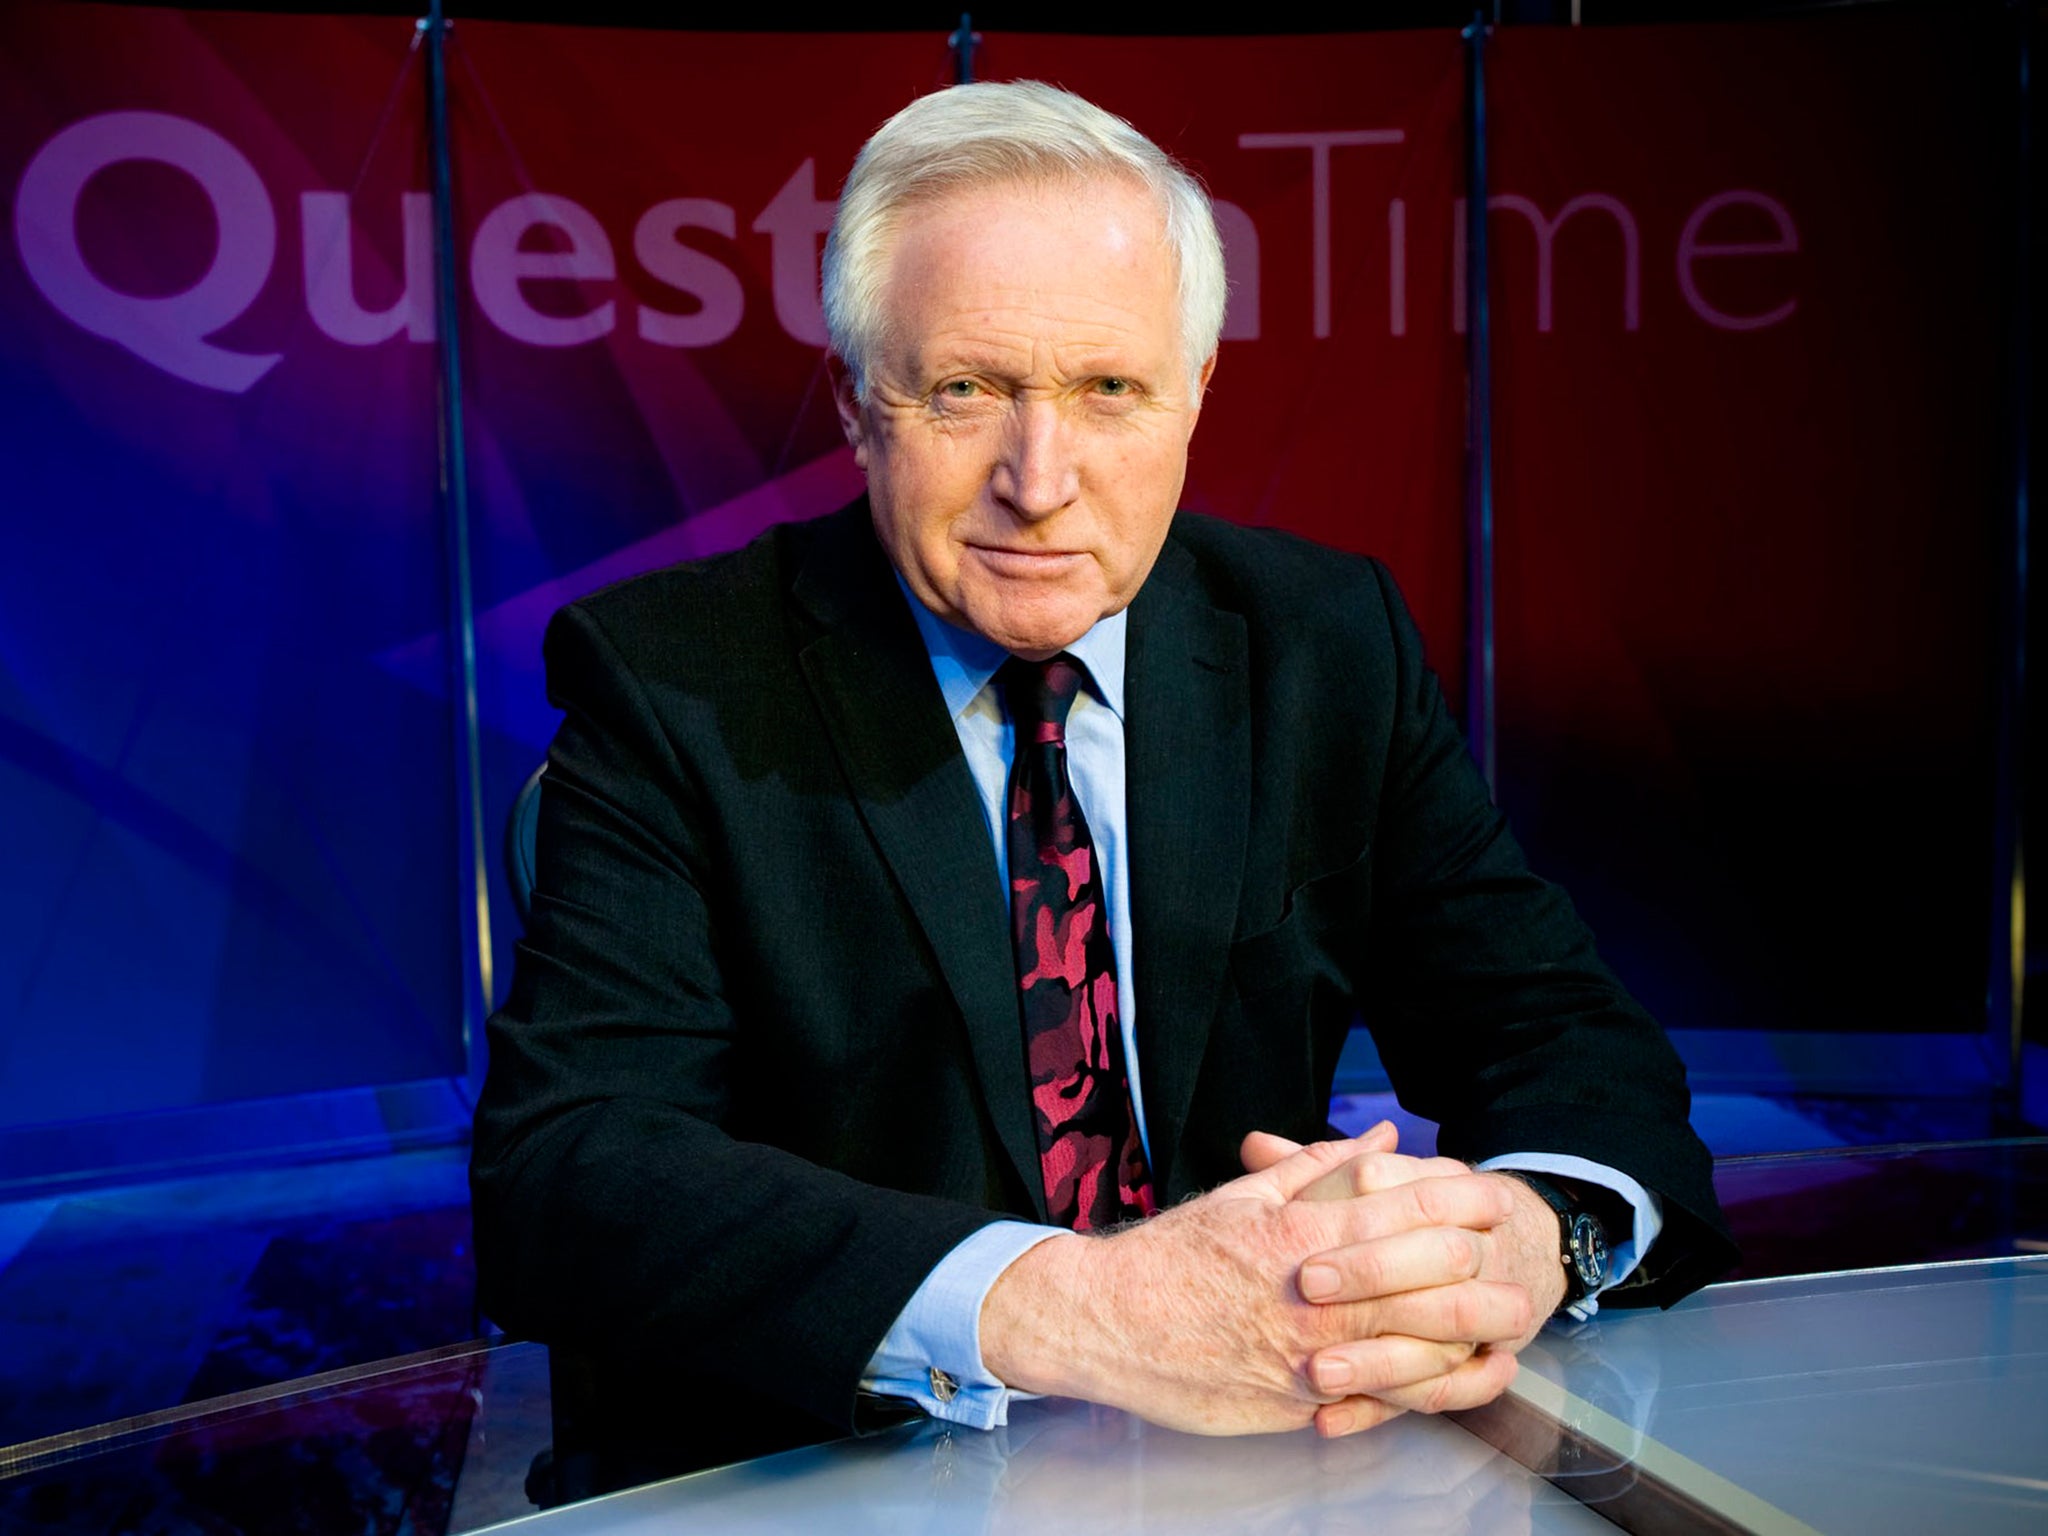 Question Time presenter David Dimbleby said it was BBC policy not to depict the prophet